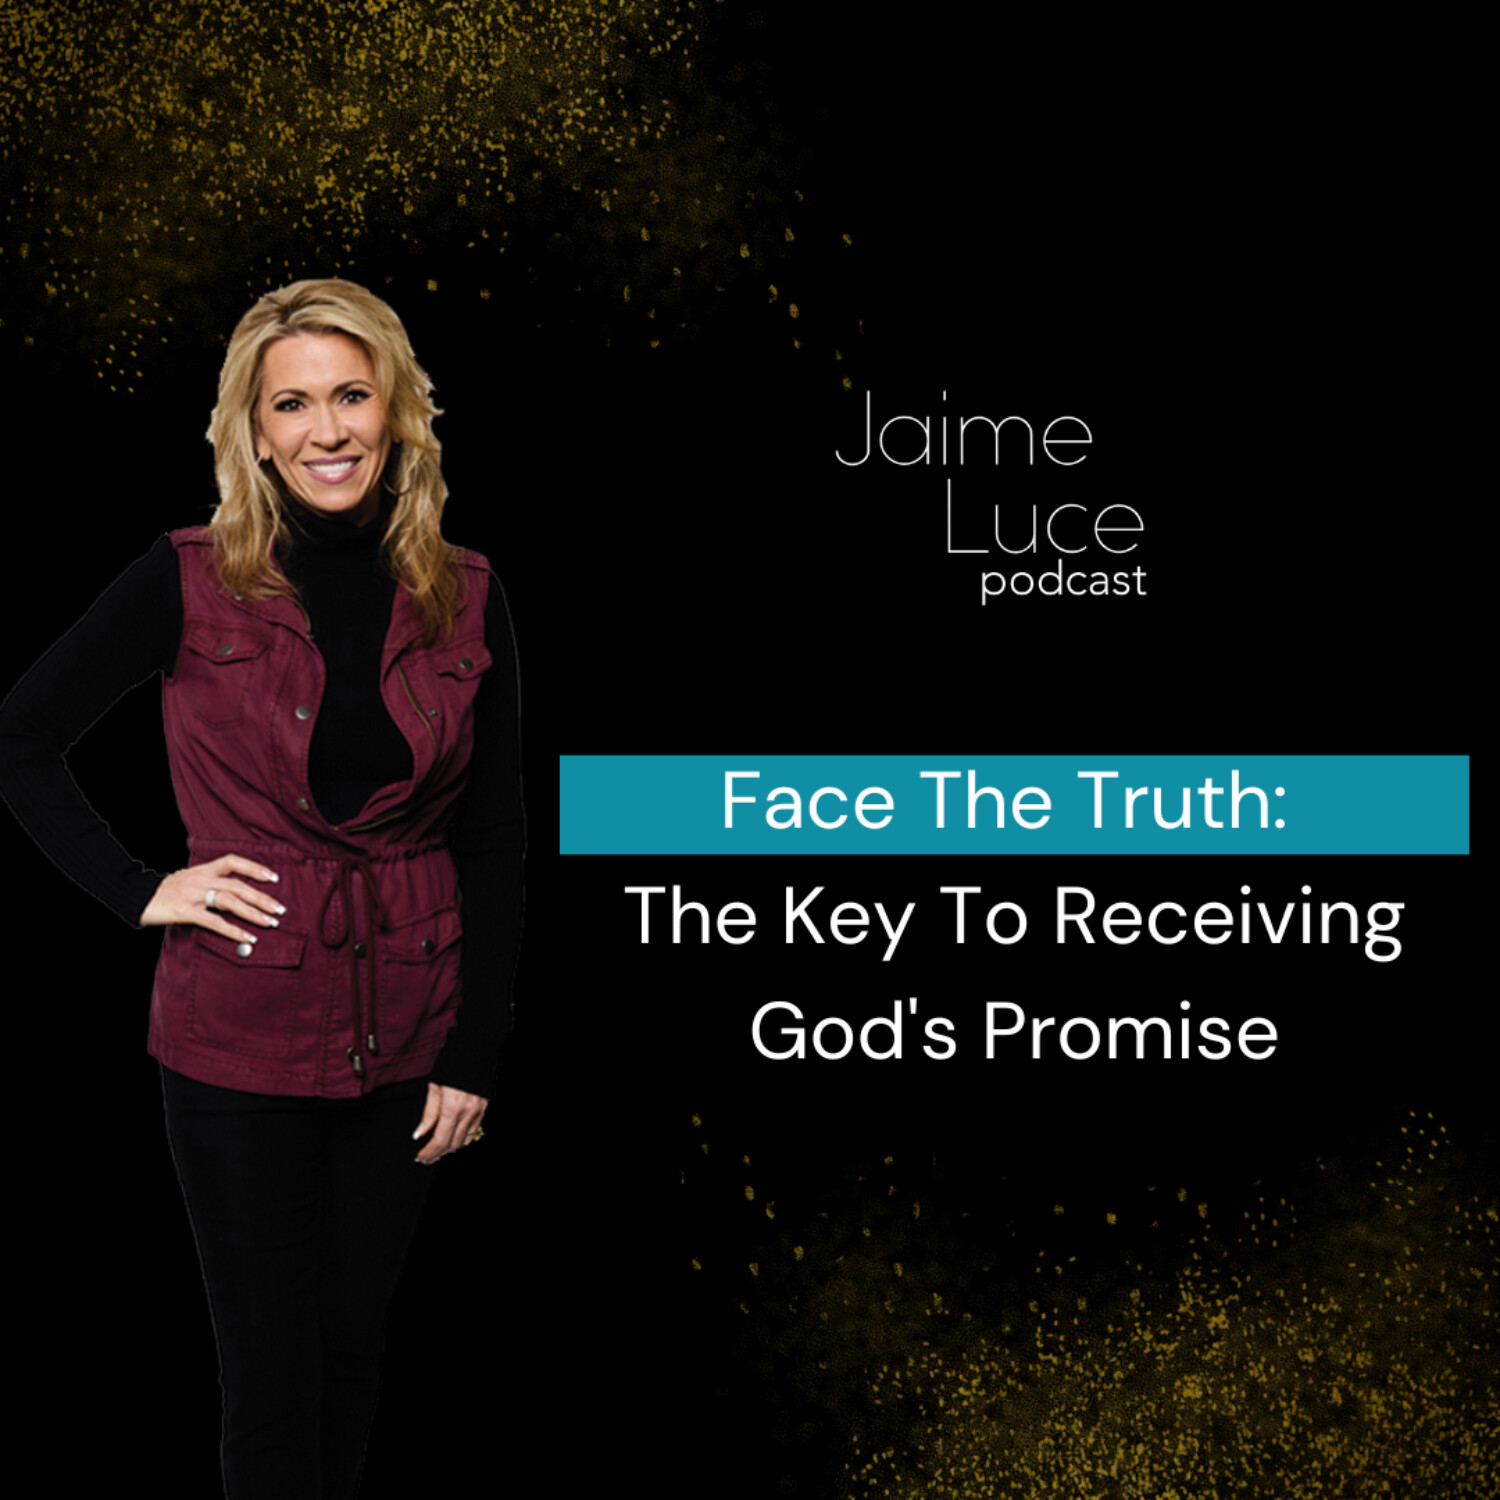 Face The Truth: The Key To Receiving God's Promise